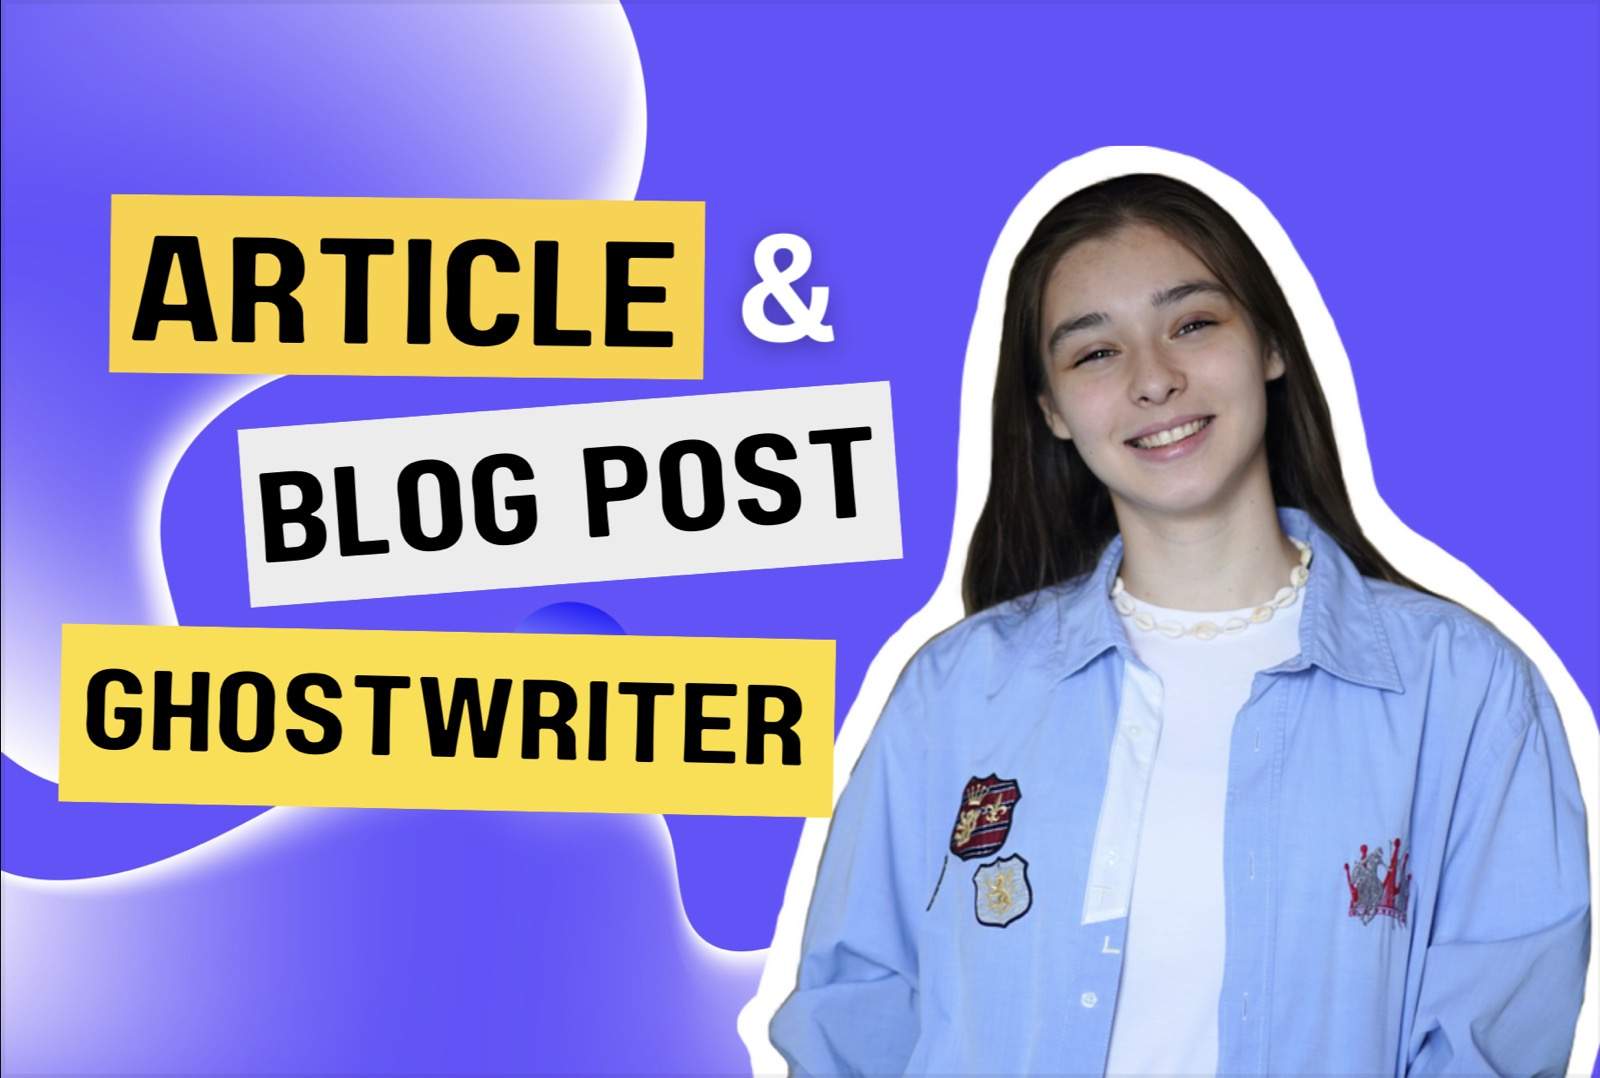 I will ghostwrite 300 words SEO articles and blog posts for you about any topic